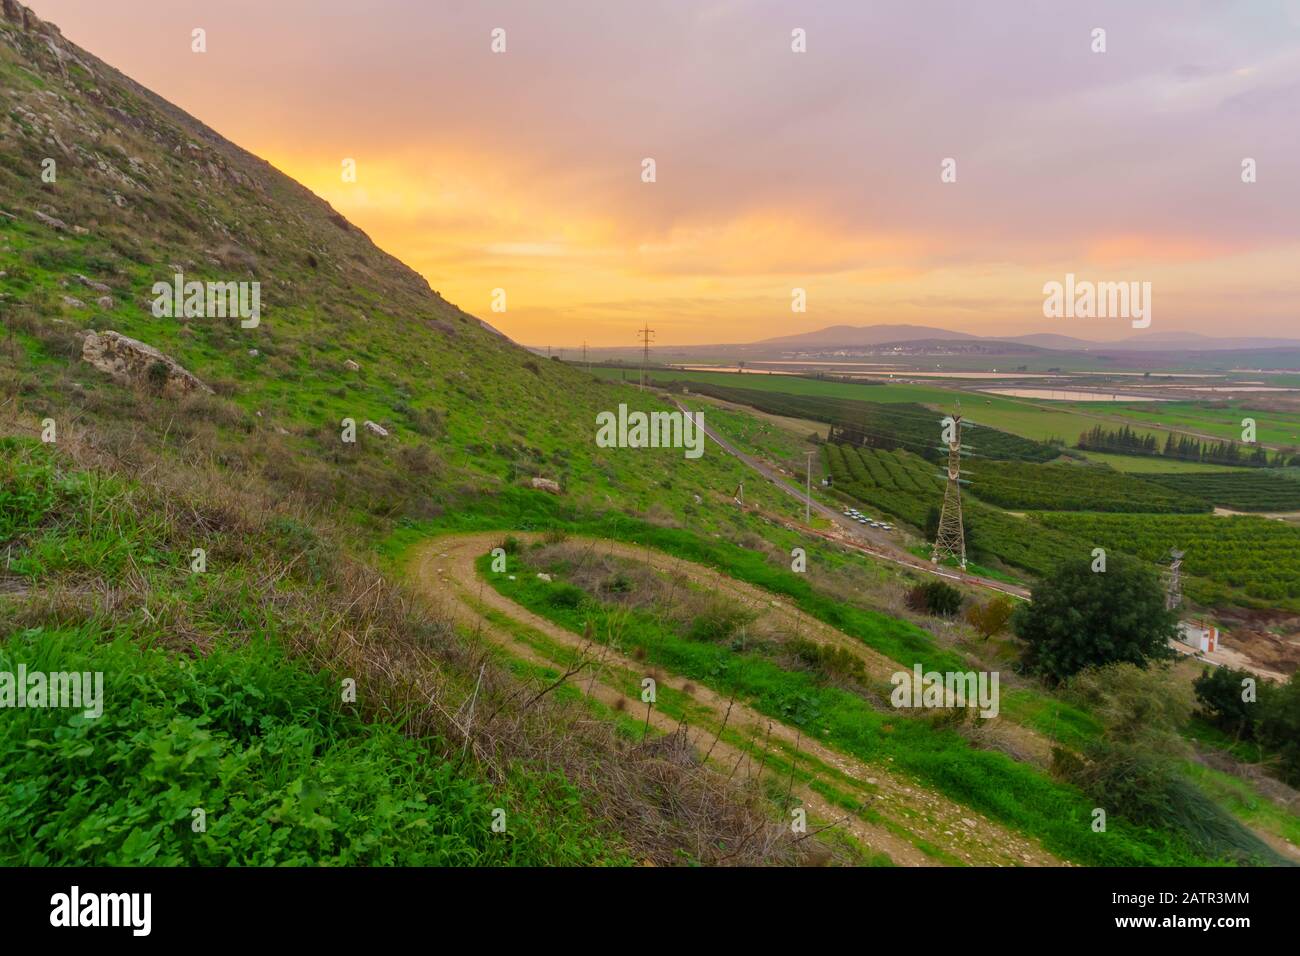 Sunset view of landscape and countryside in the eastern part of the Jezreel Valley, Northern Israel Stock Photo